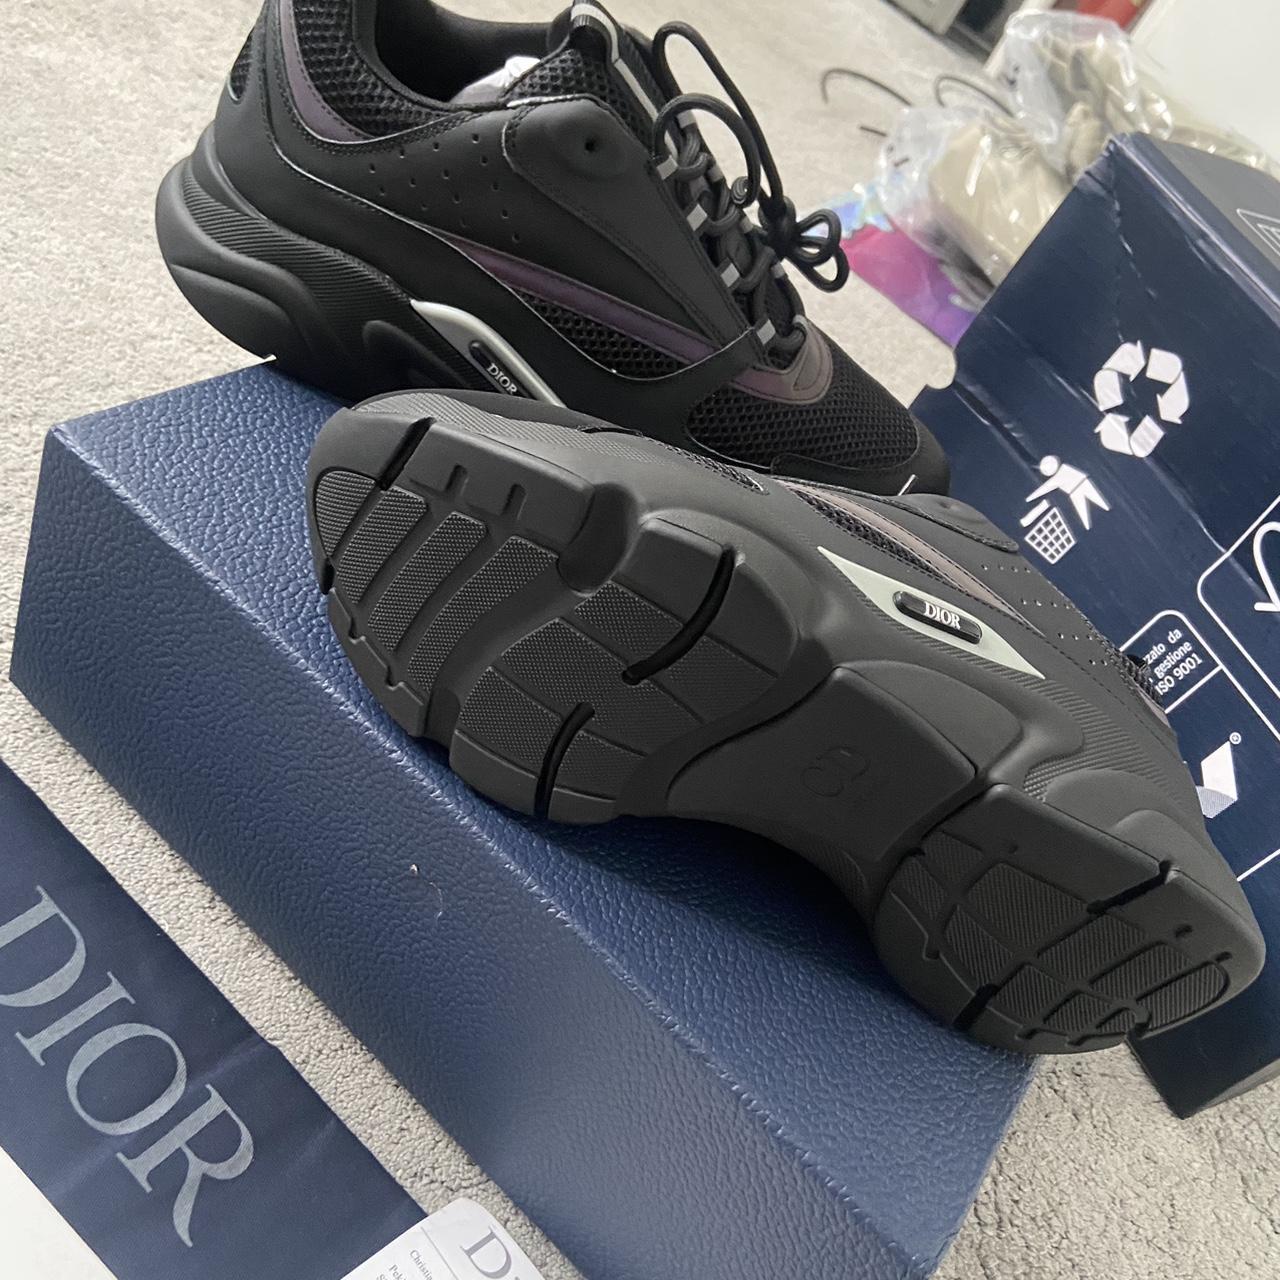 Black Dior B22 Reflective I'm a size 9 but they - Depop